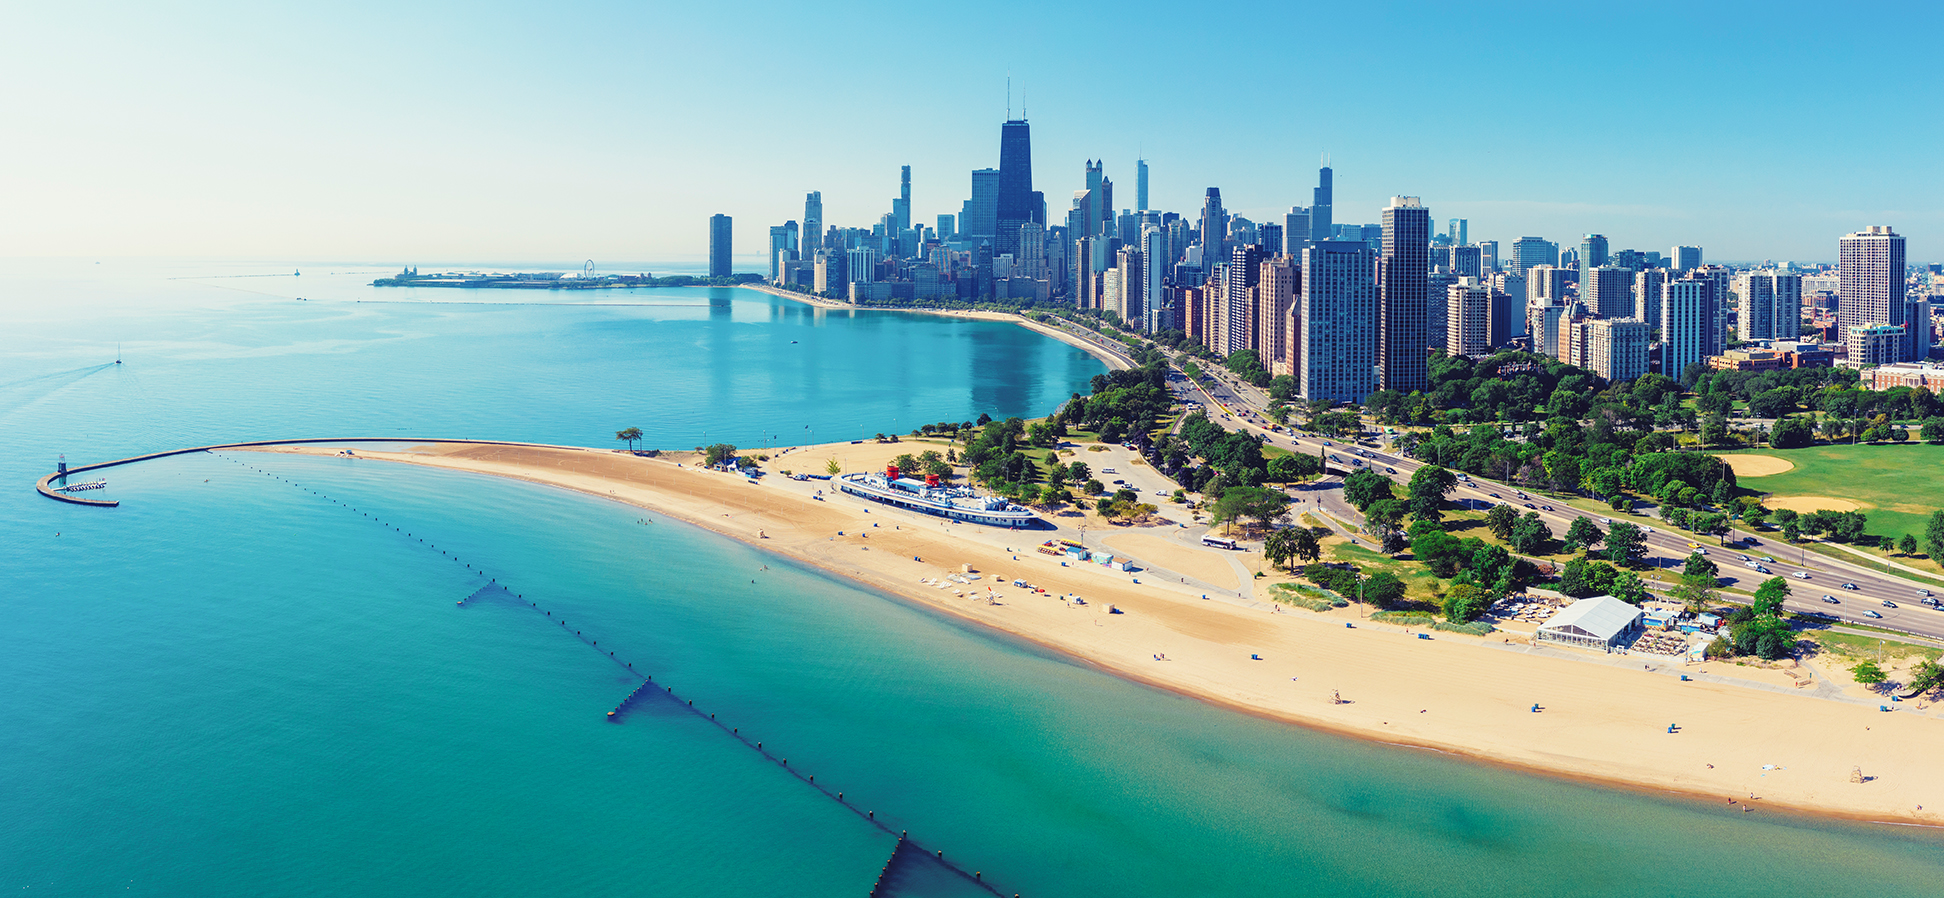 SpotHero Summer Picks: Our Top 10 Things to do in Chicago This Summer